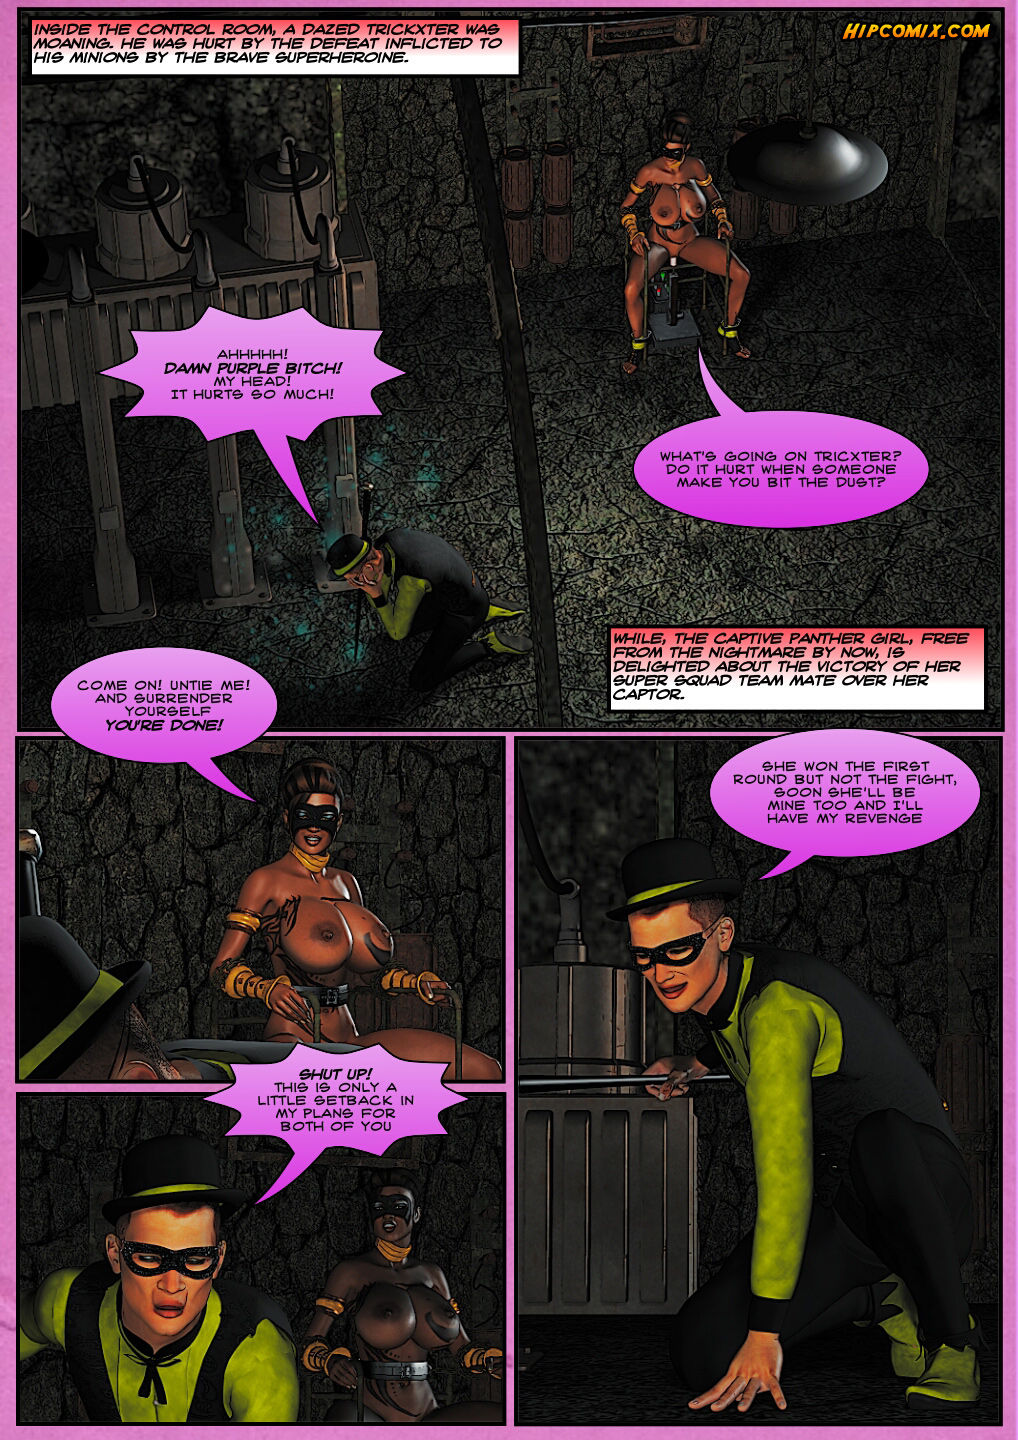 Purple Kitty - Issue 2 - HipComix page 8